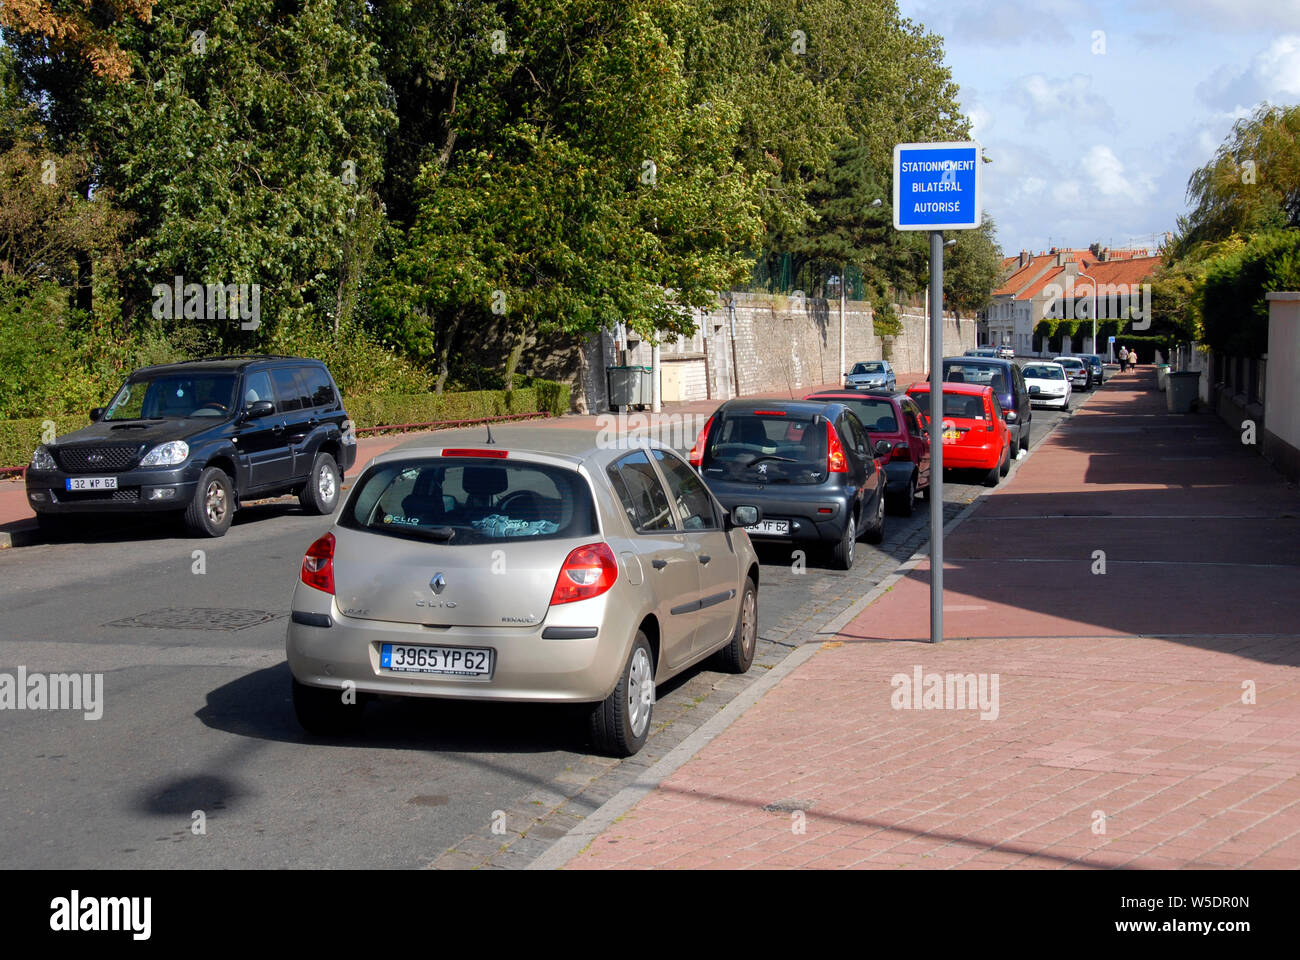 Cars parked legally on both sides of the street, Calais, France Stock Photo